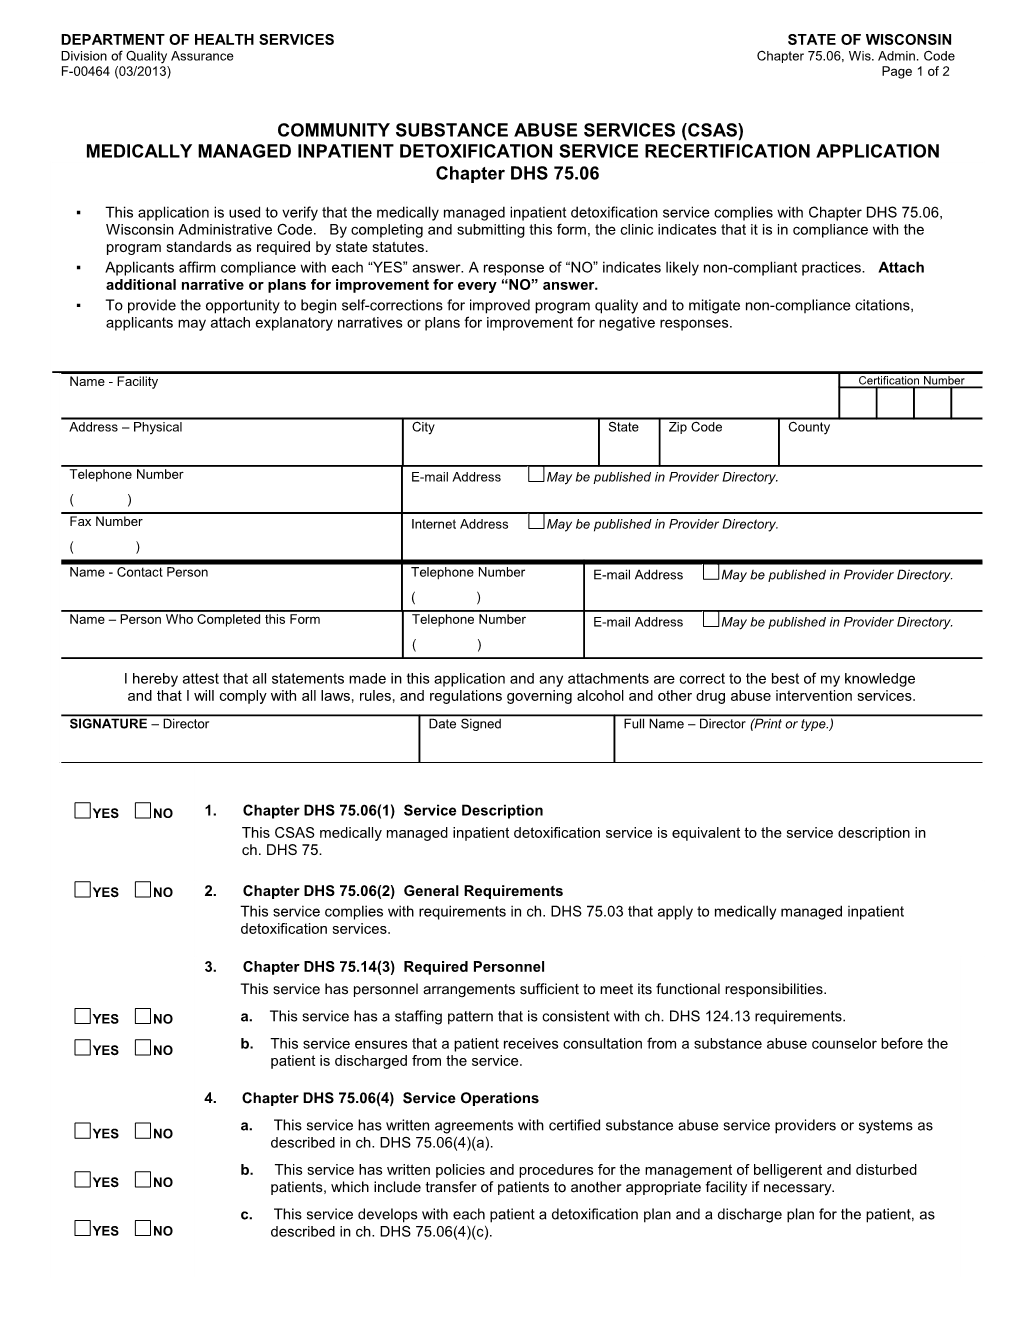 CSAS Medically Managed Inpatient Detoxification Servicerecertification Application - DHS